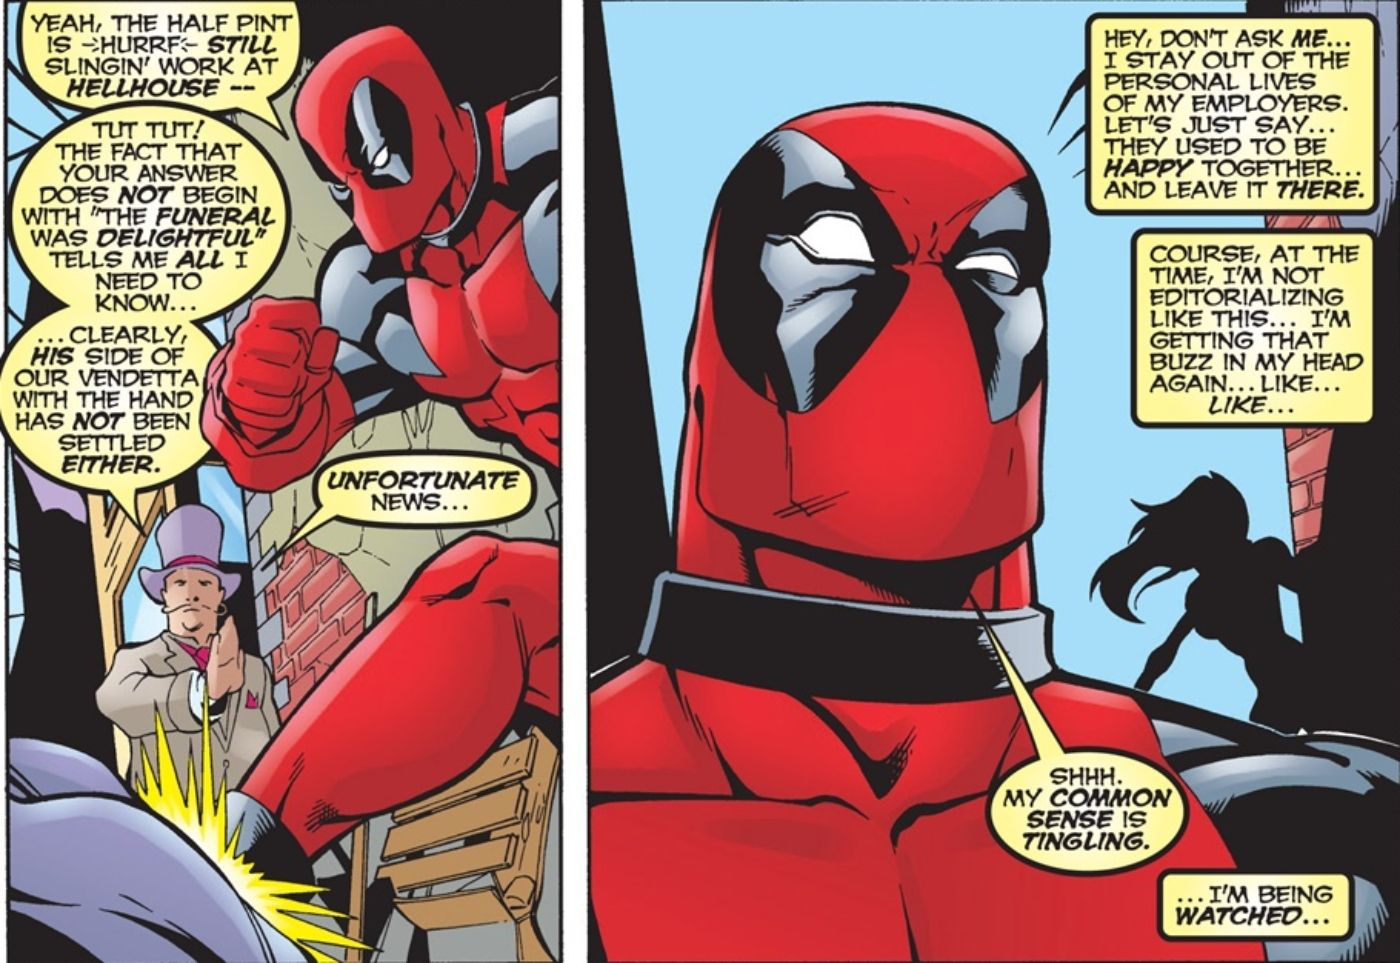 Deadpool saying that his 'common sense' is tingling.